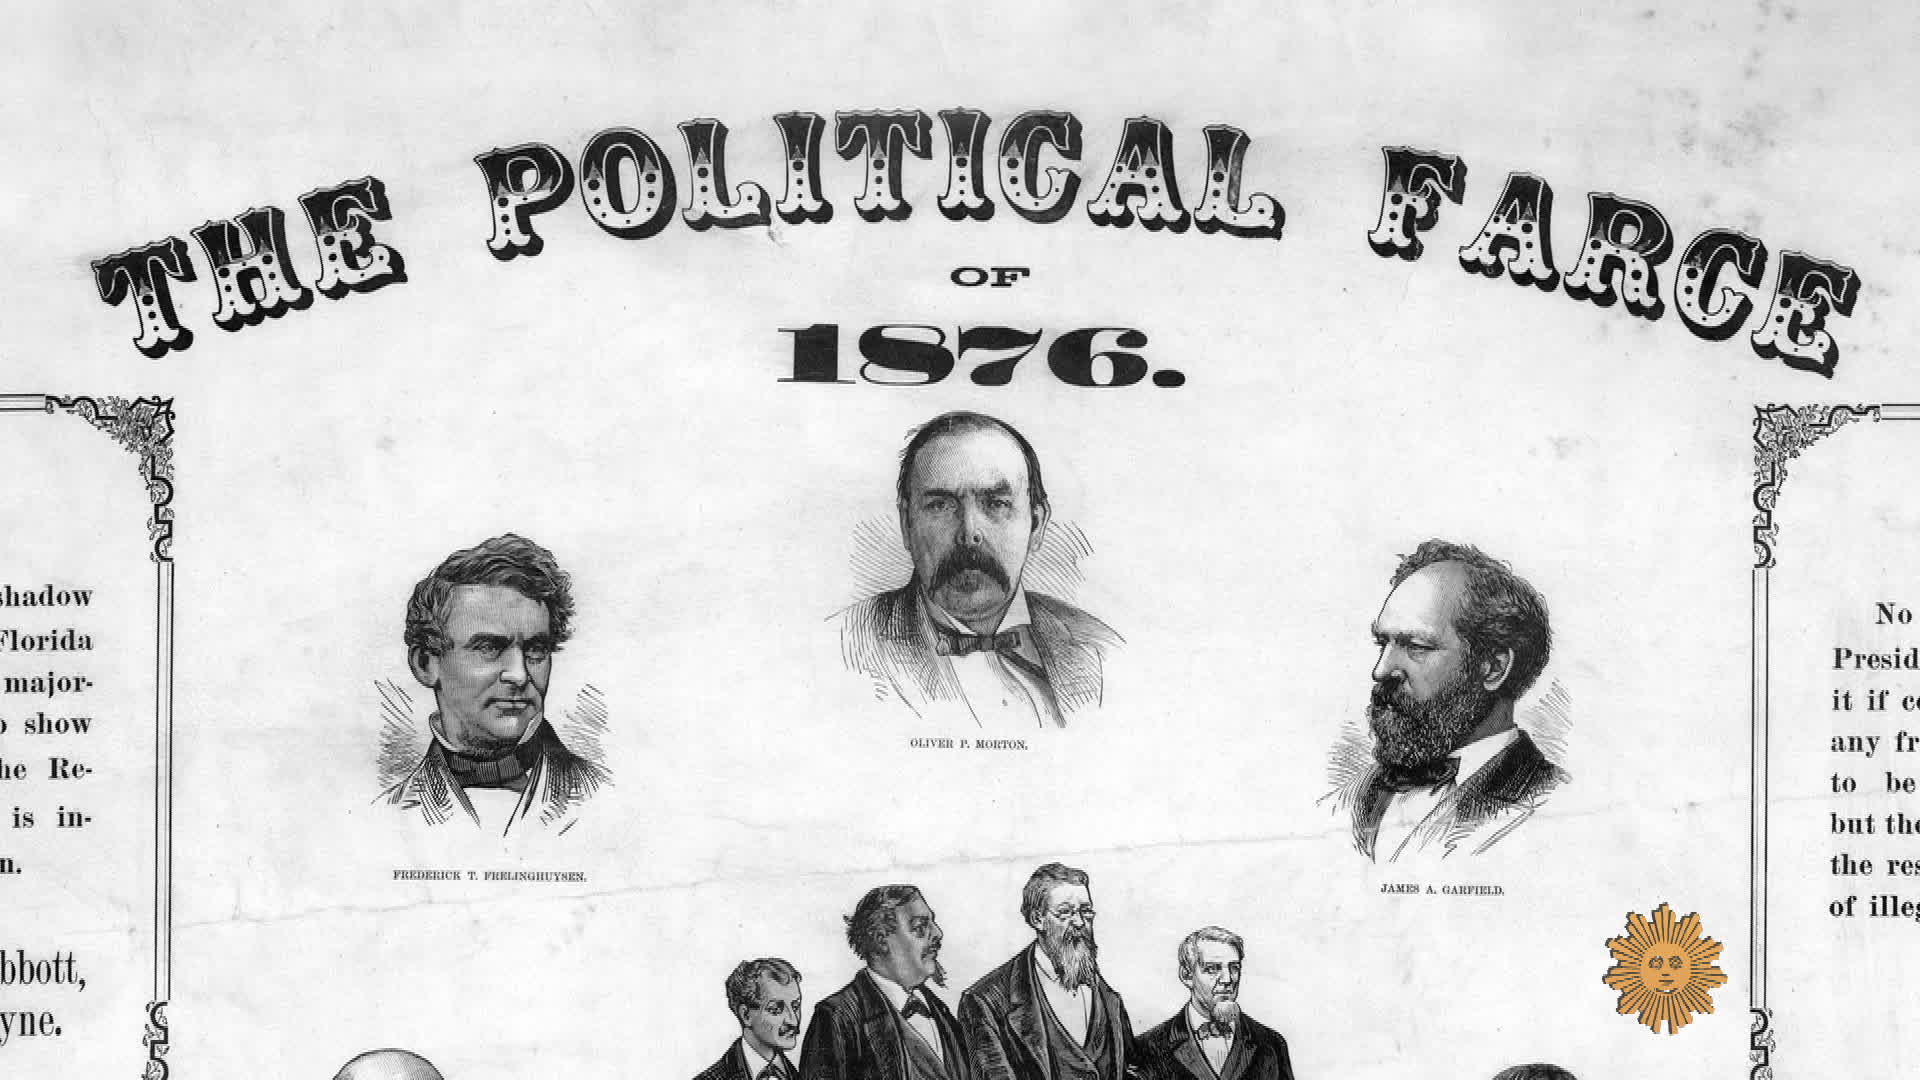 Voter fraud, suppression, partisanship: A look at the 1876 election 